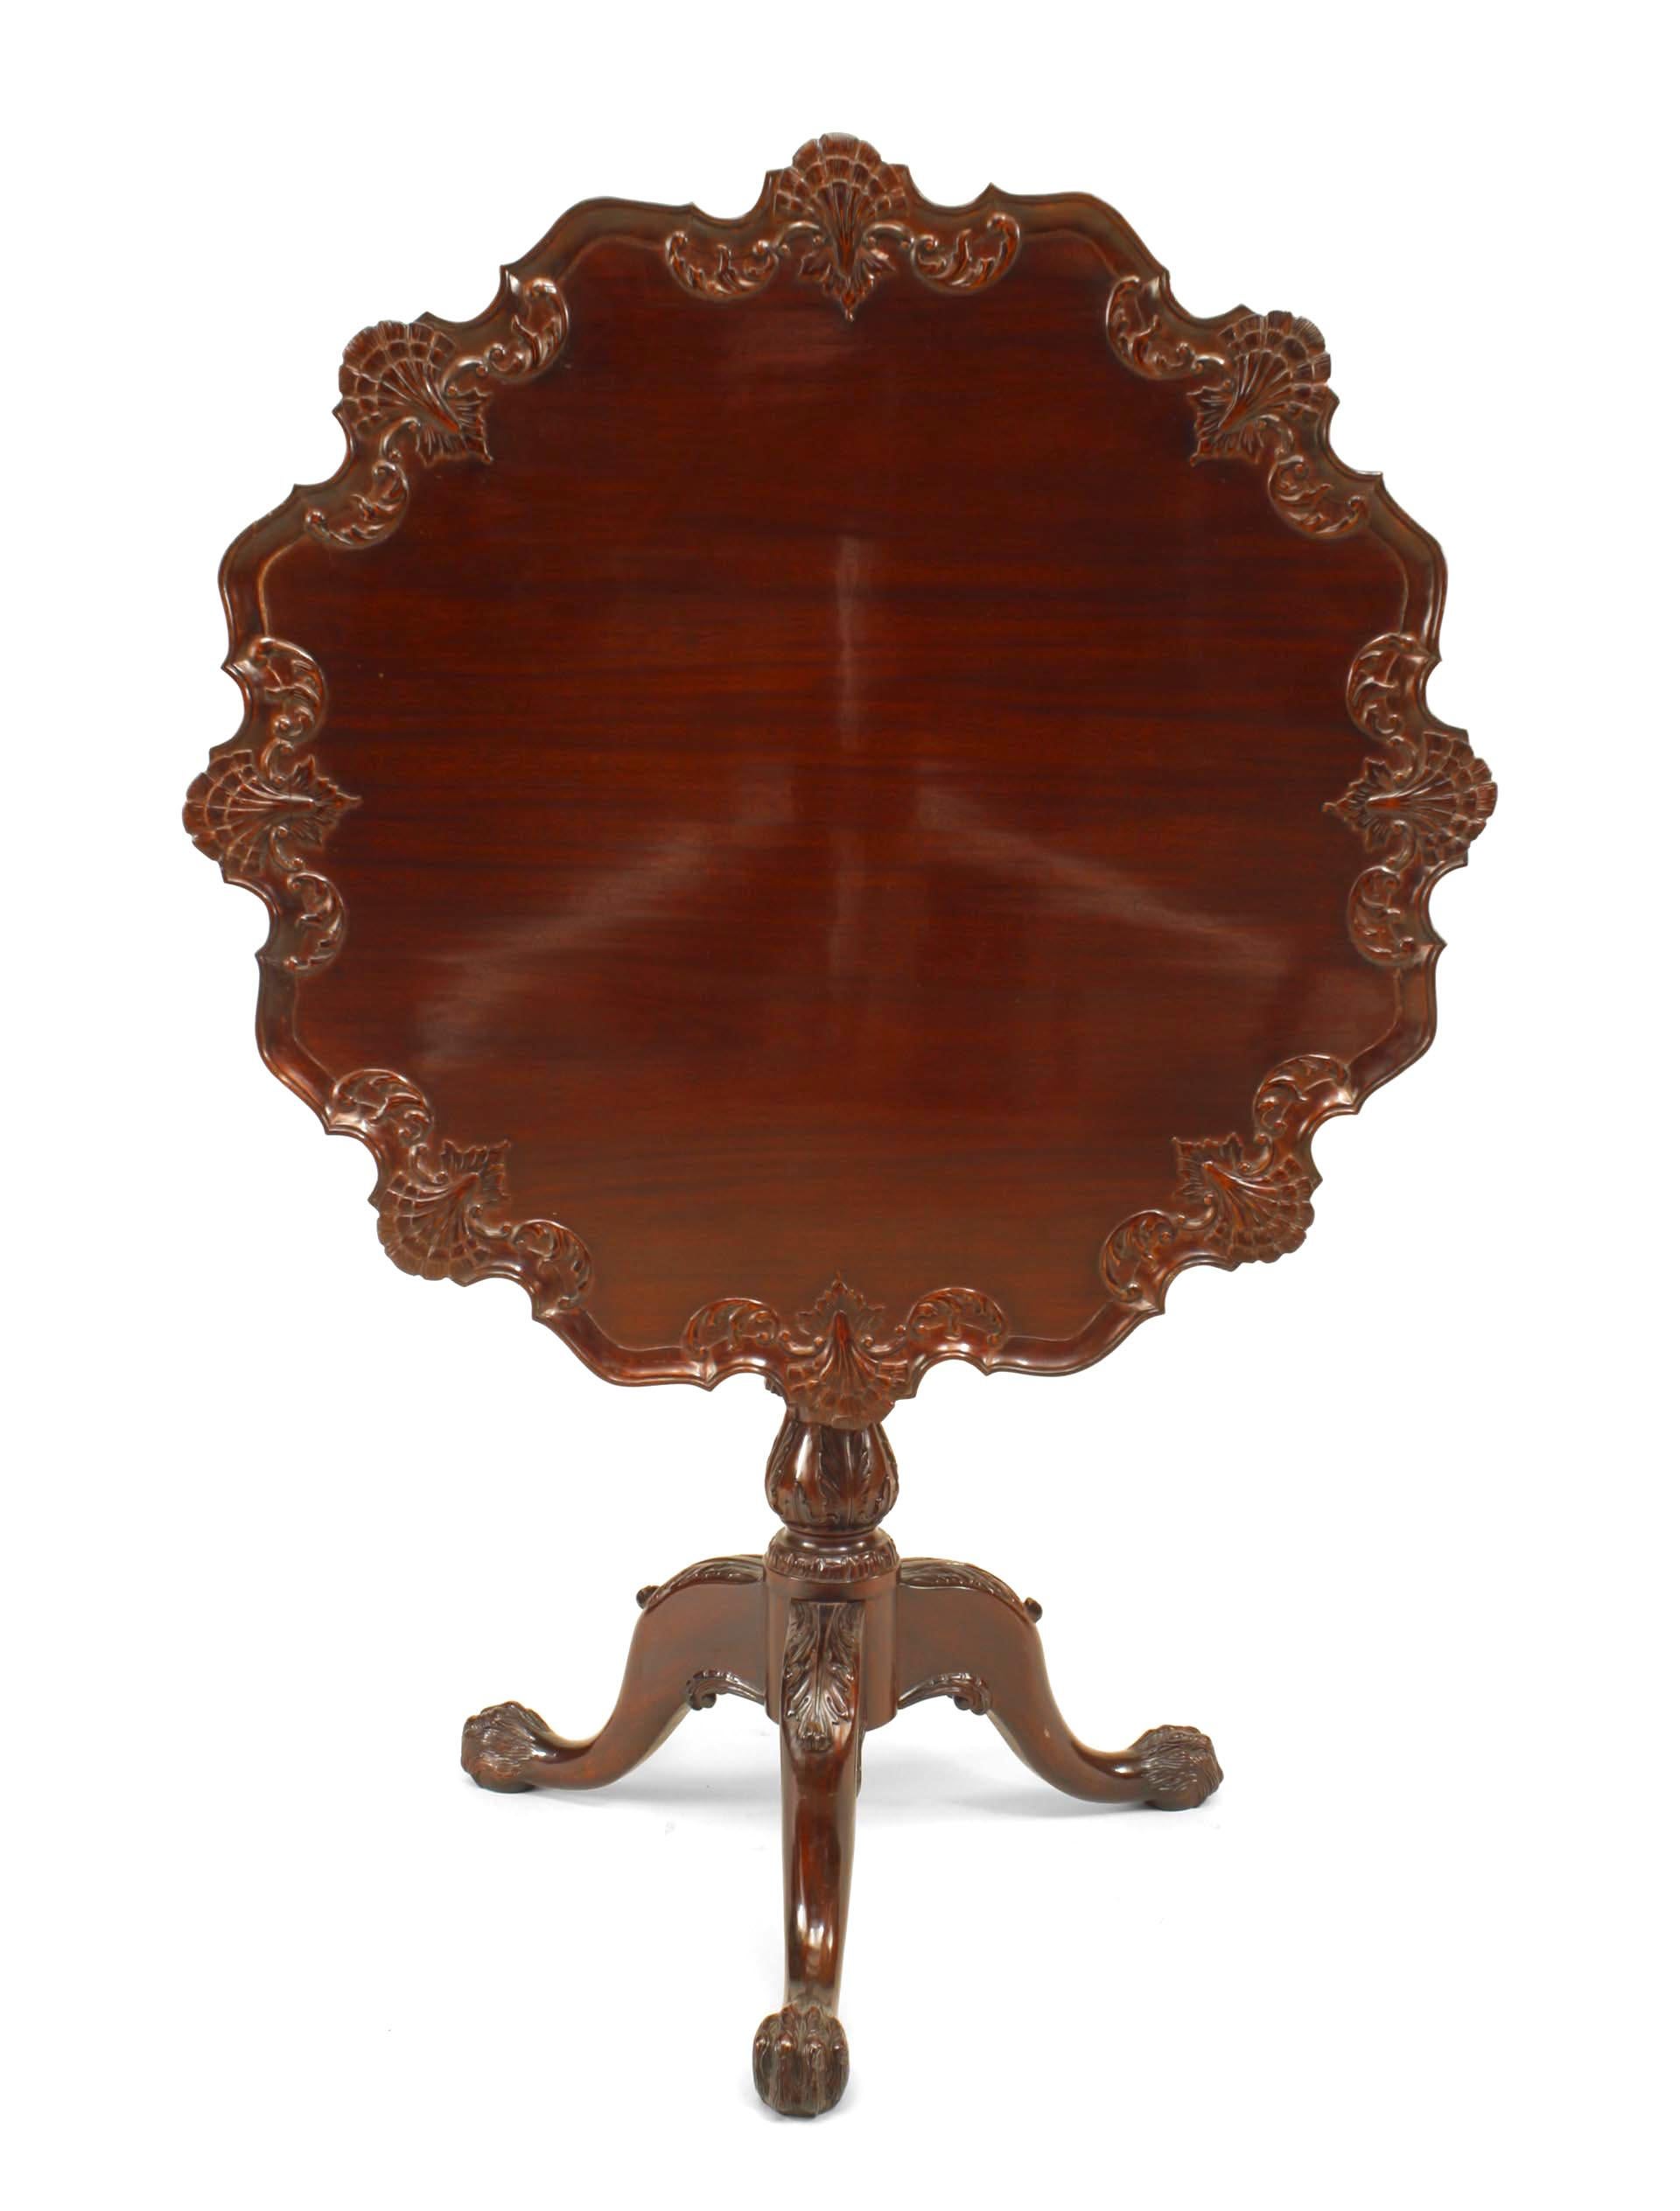 20th century English Chippendale style mahogany tilt-top end table with shell design carving to top edge.